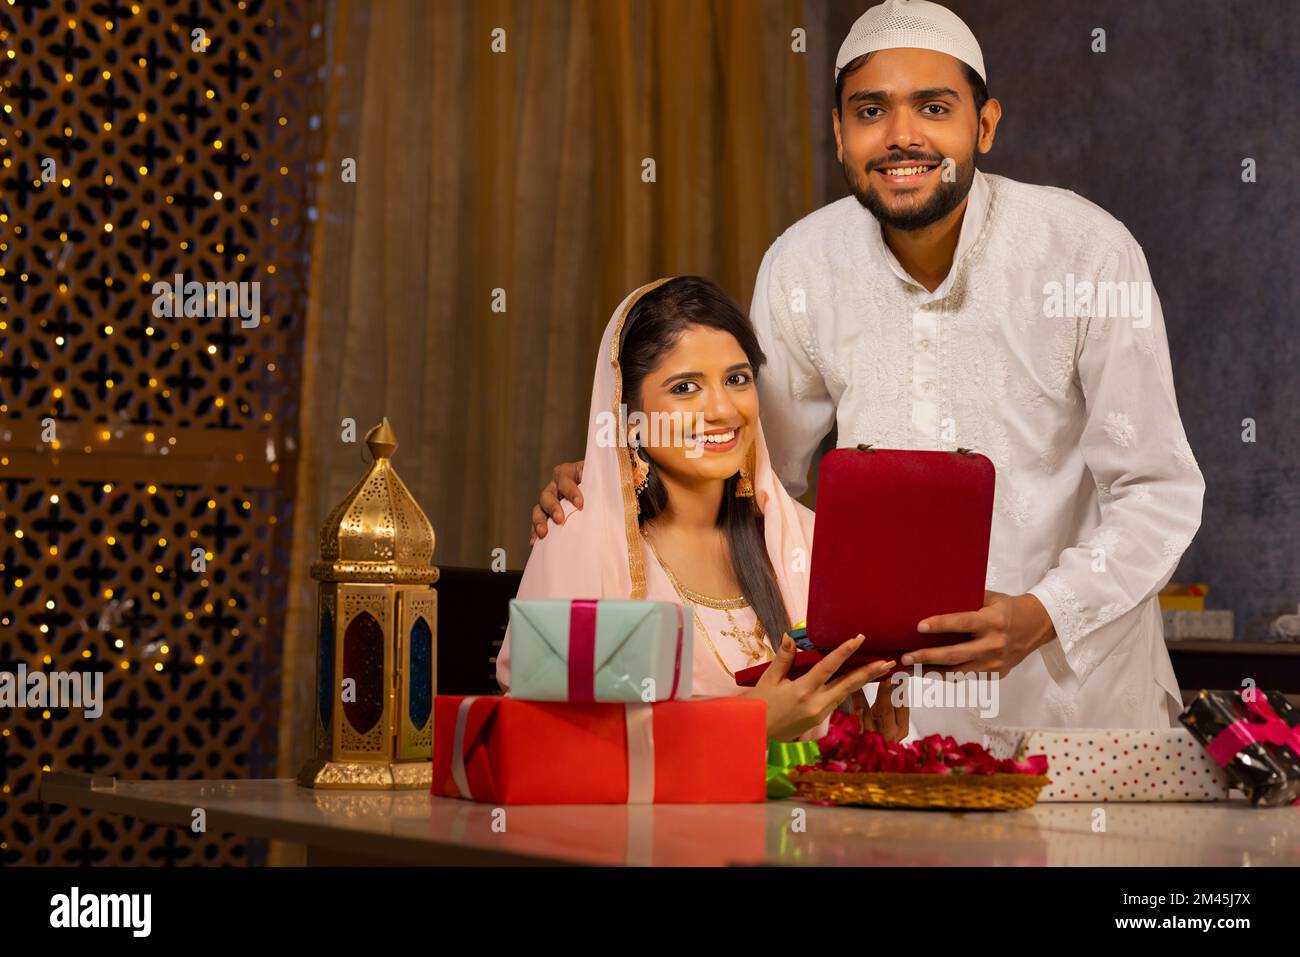 Muslim man giving  gift to his wife during Eid-Ul-Fitr Stock Photo